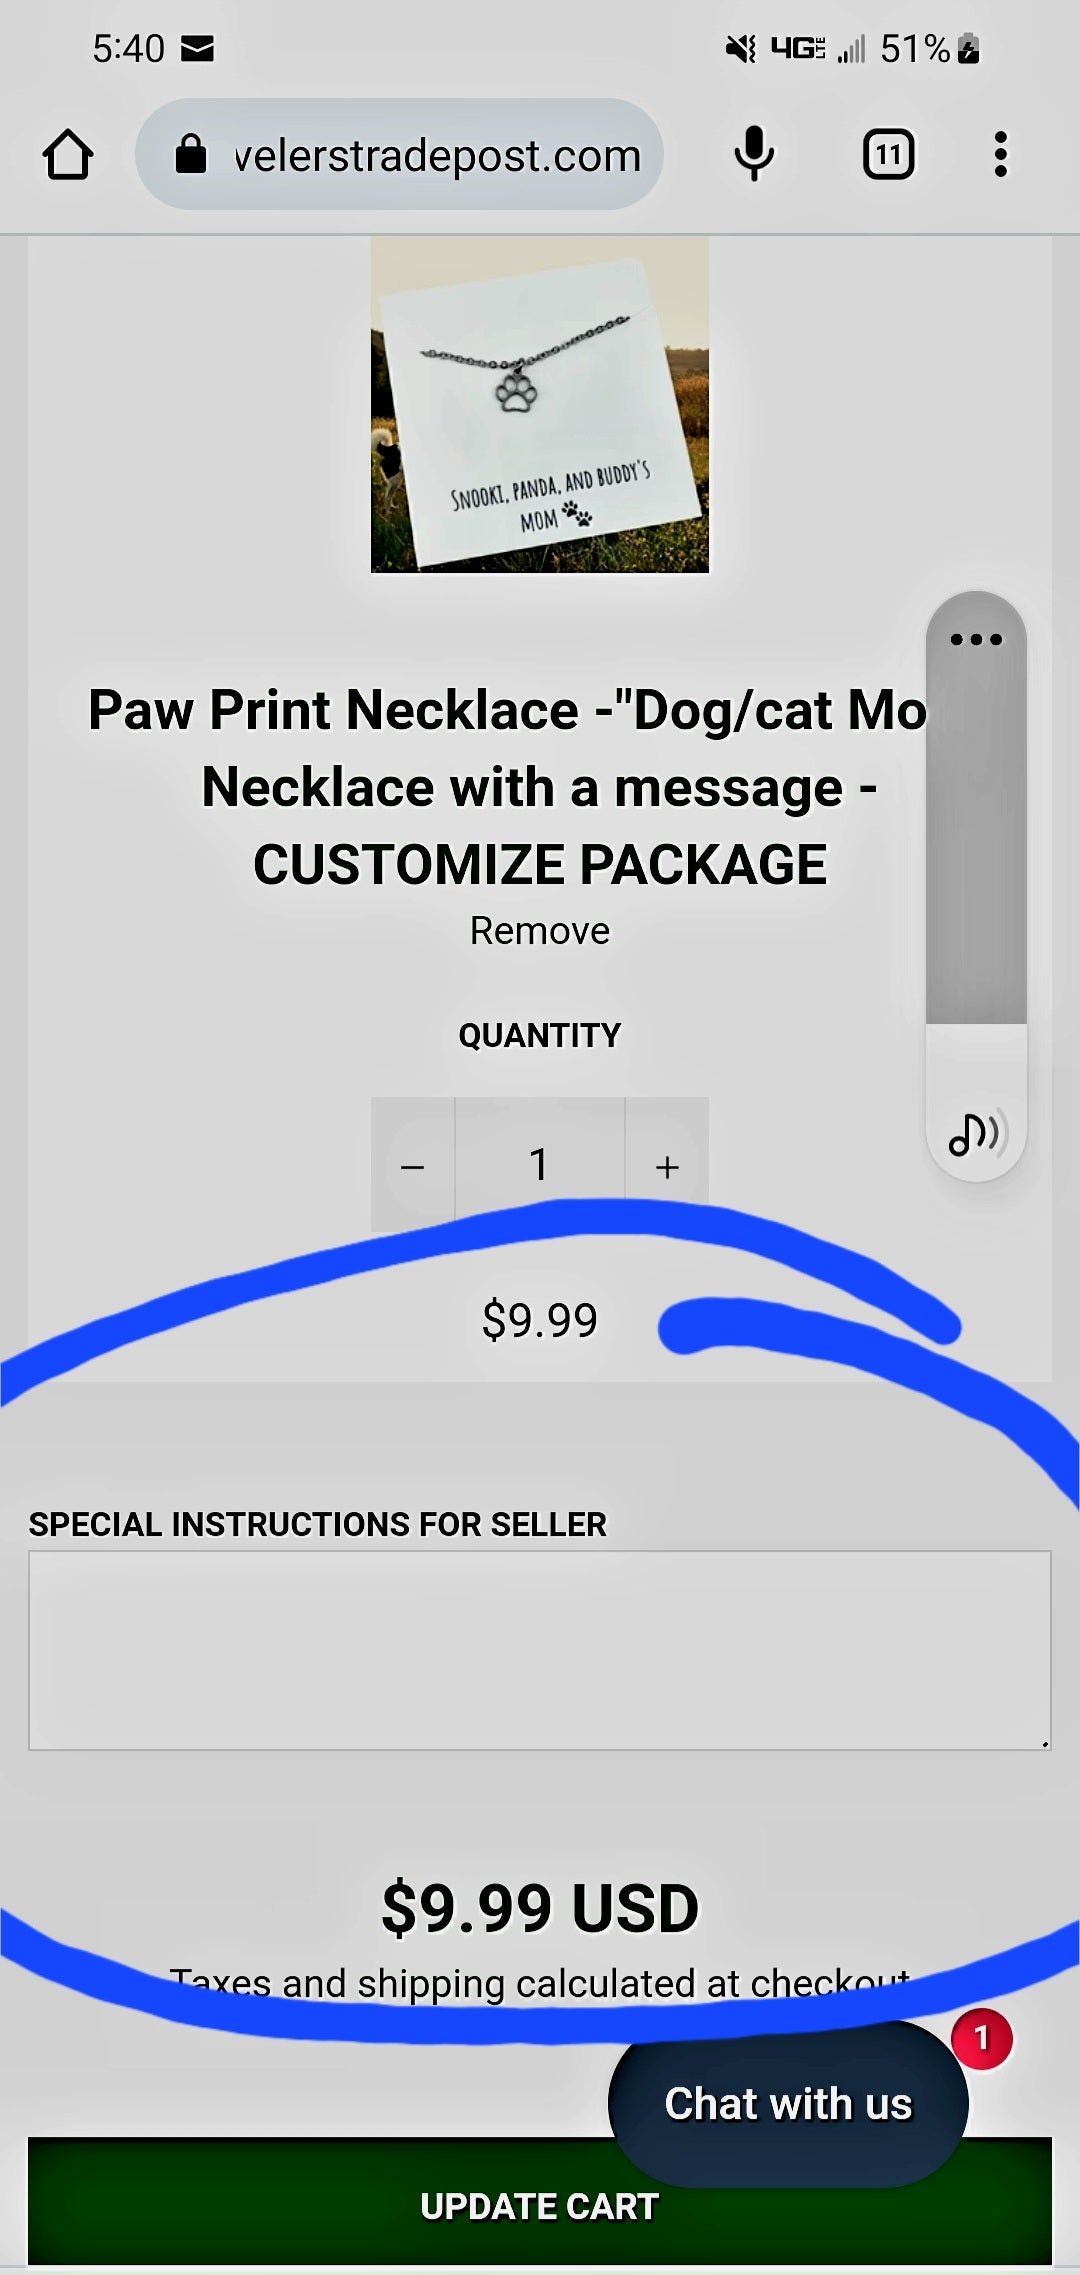 Paw Print Necklace -"Dog/cat Mom" Necklace with a message - CUSTOMIZE PACKAGE - Travelers Trade Post